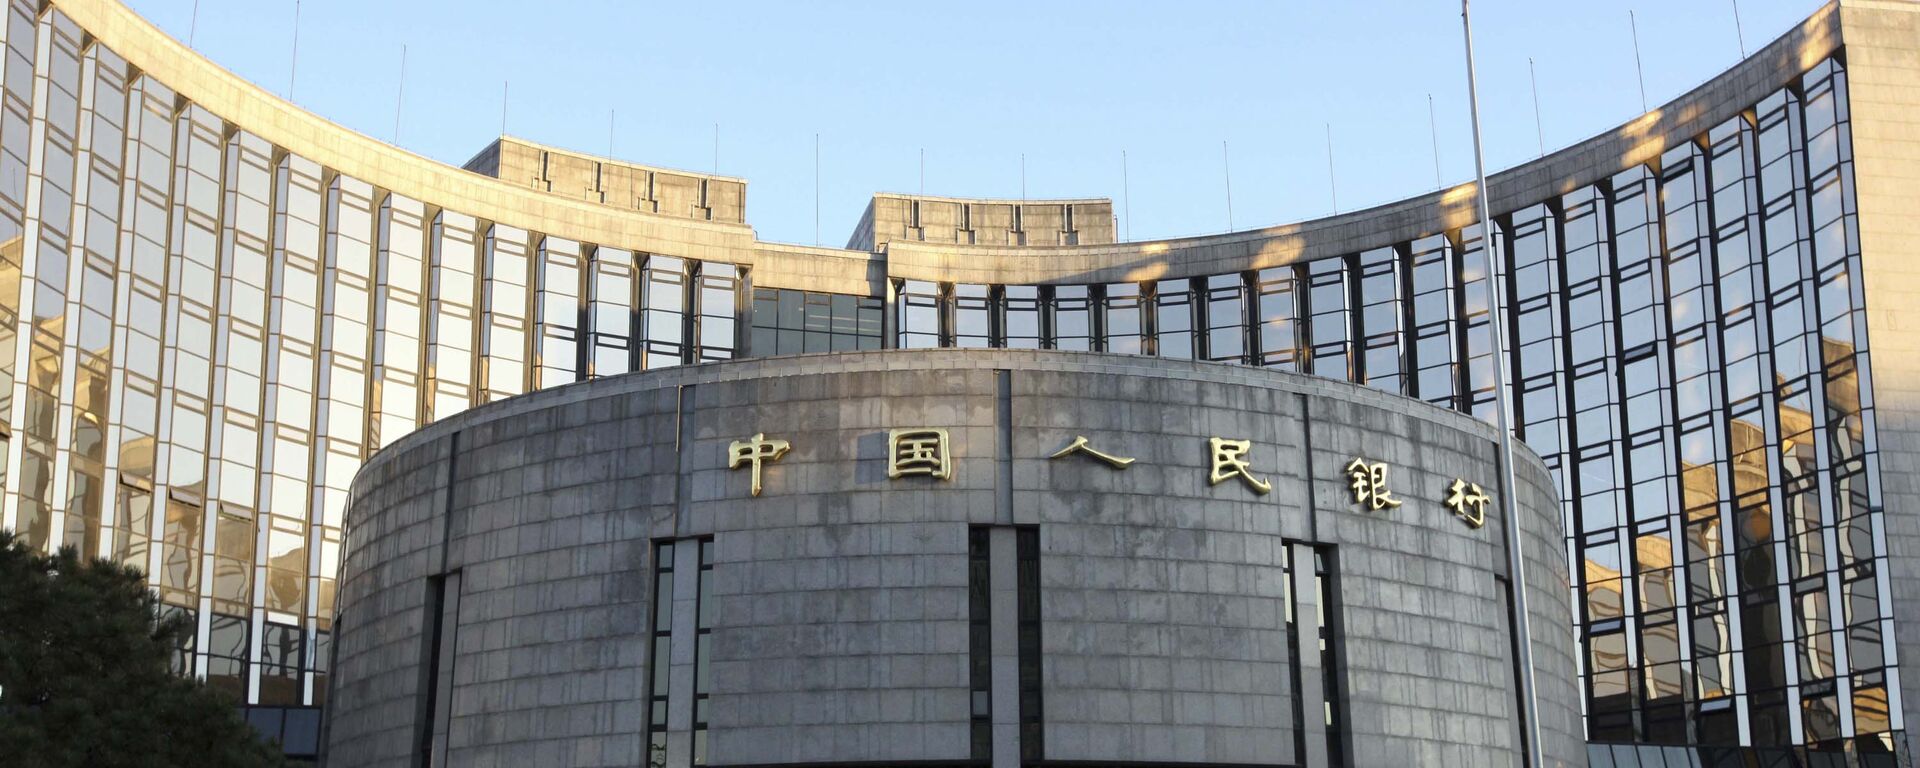 In this Nov. 27, 2008, file photo released by China's Xinhua News Agency, a Chinese flag flutters in front of the headquarters of the People's Bank of China (PBOC) in Beijing - Sputnik International, 1920, 27.04.2021